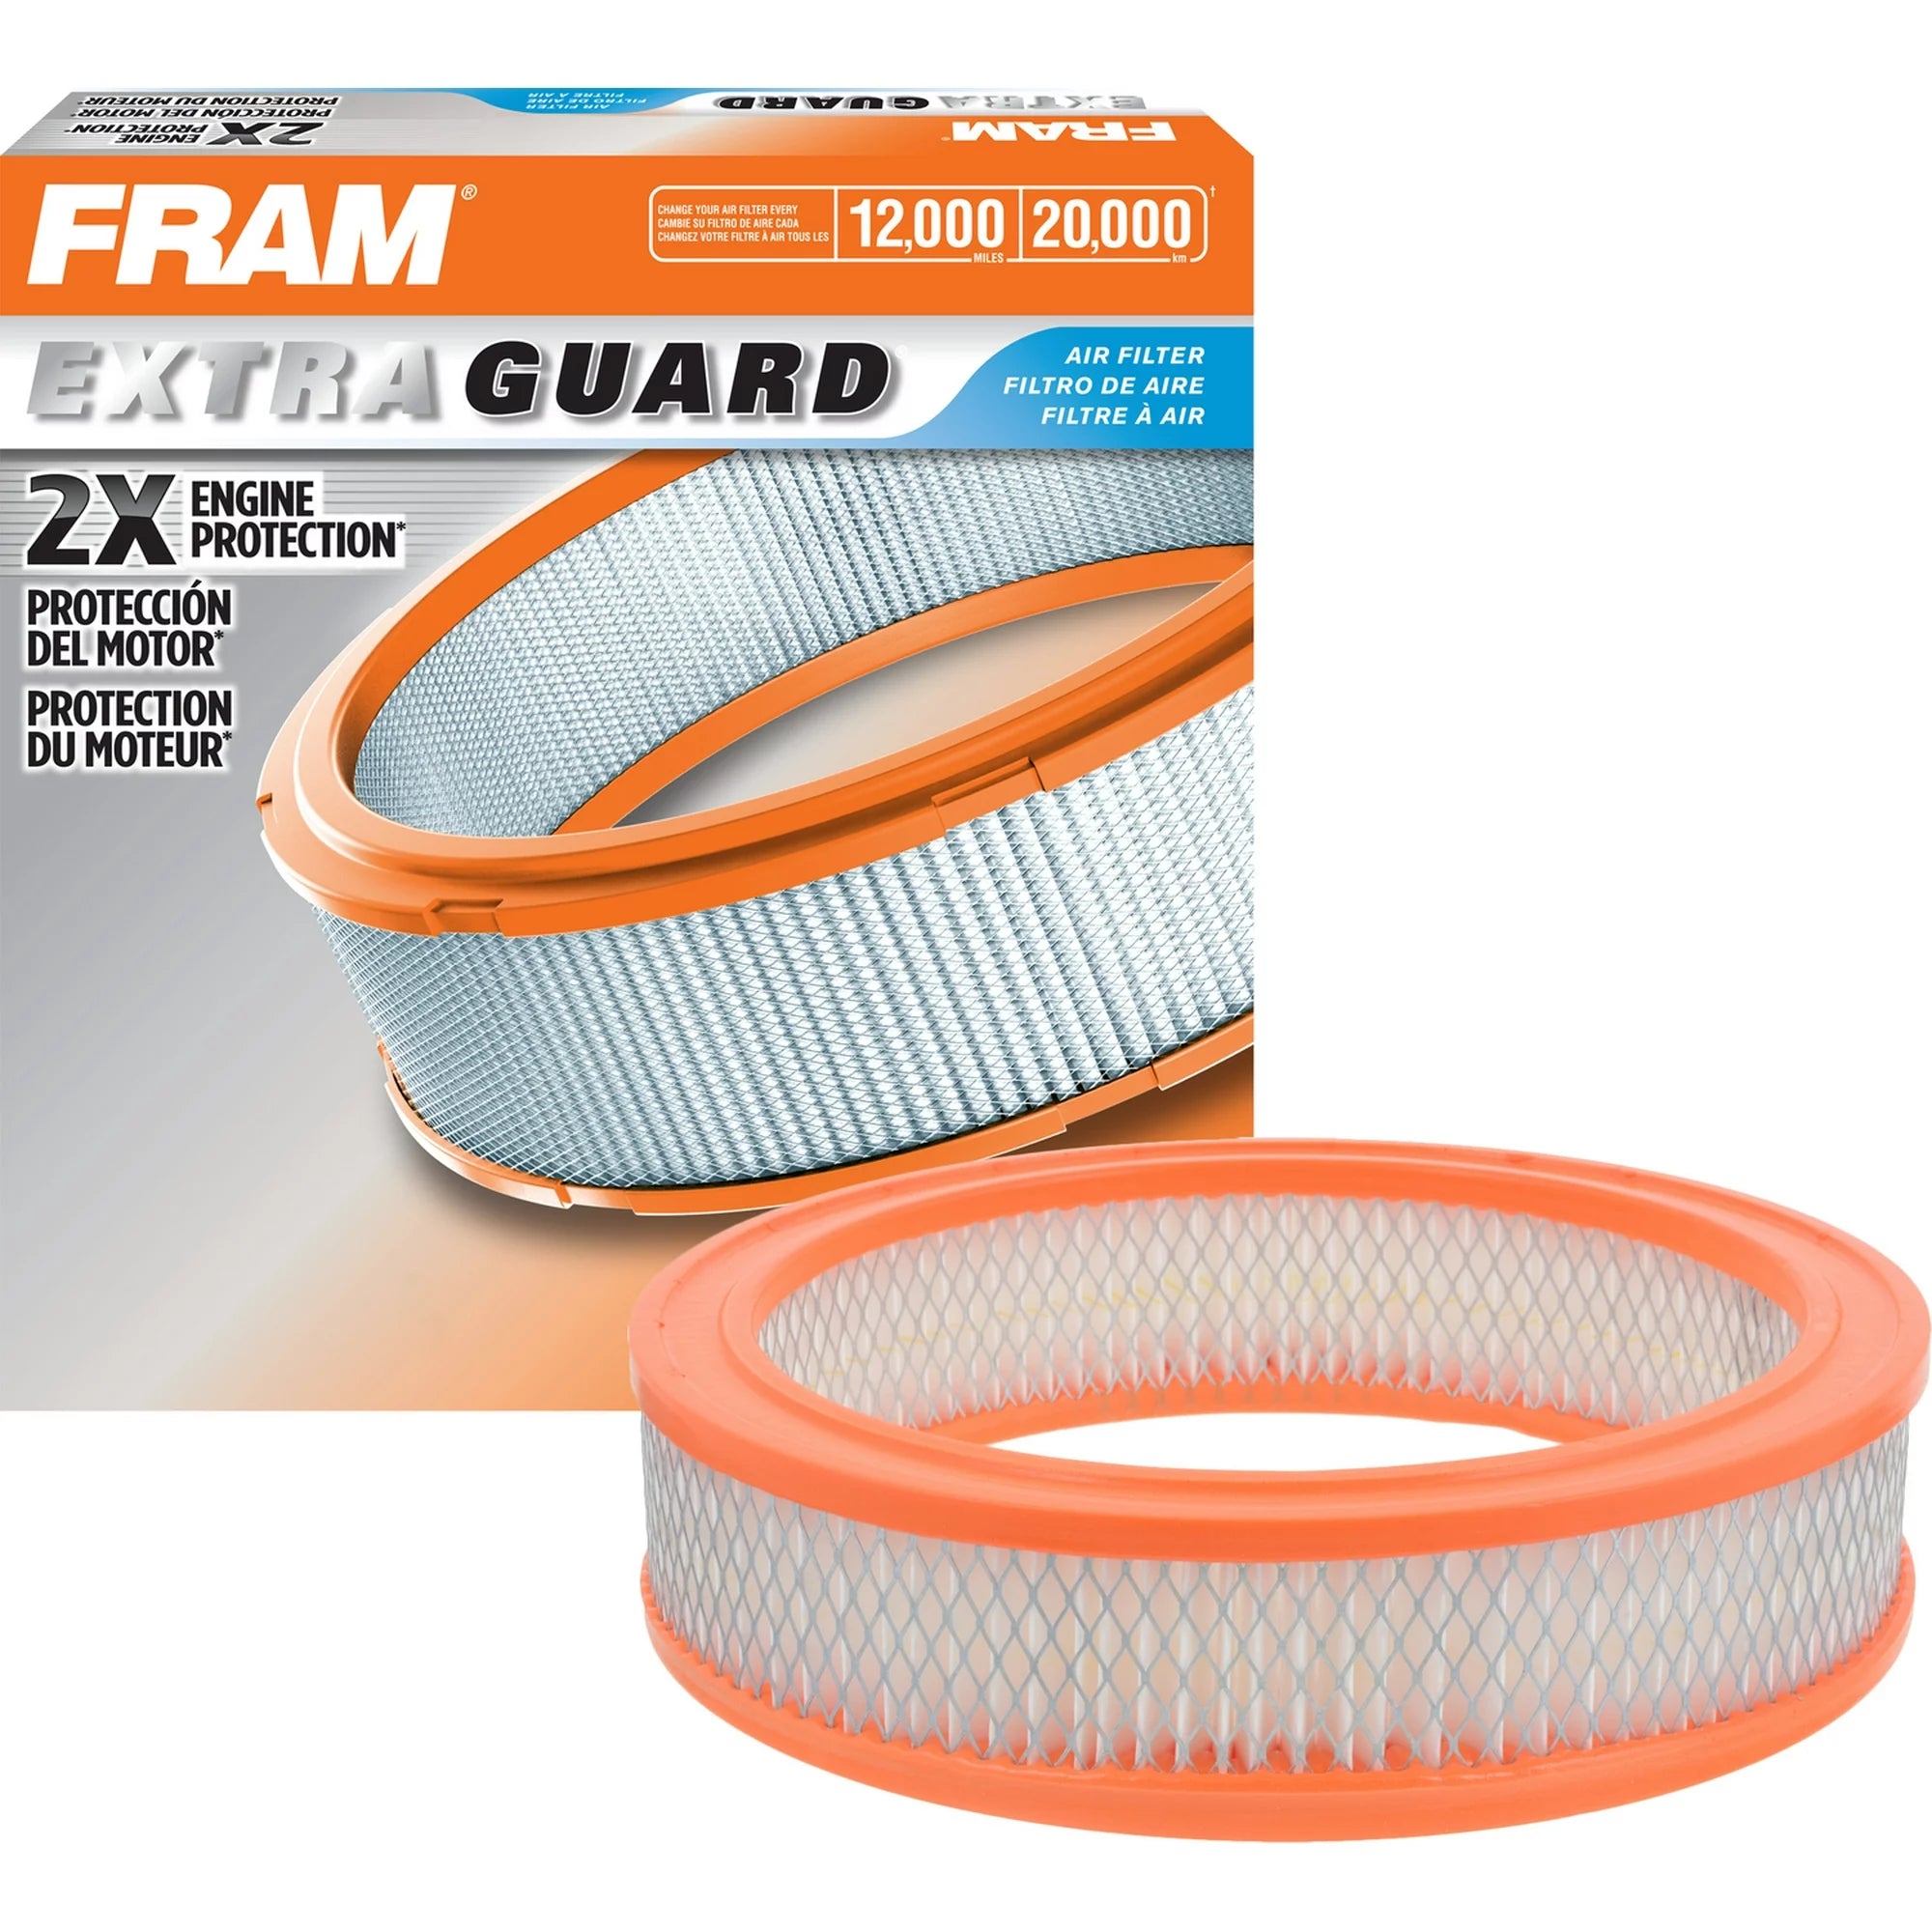 FRAM Extra Guard CA184 Engine Air Filter for Select American Motors, Dodge, Ford, Jeep, Mercury, Plymouth and Studebaker Vehicles